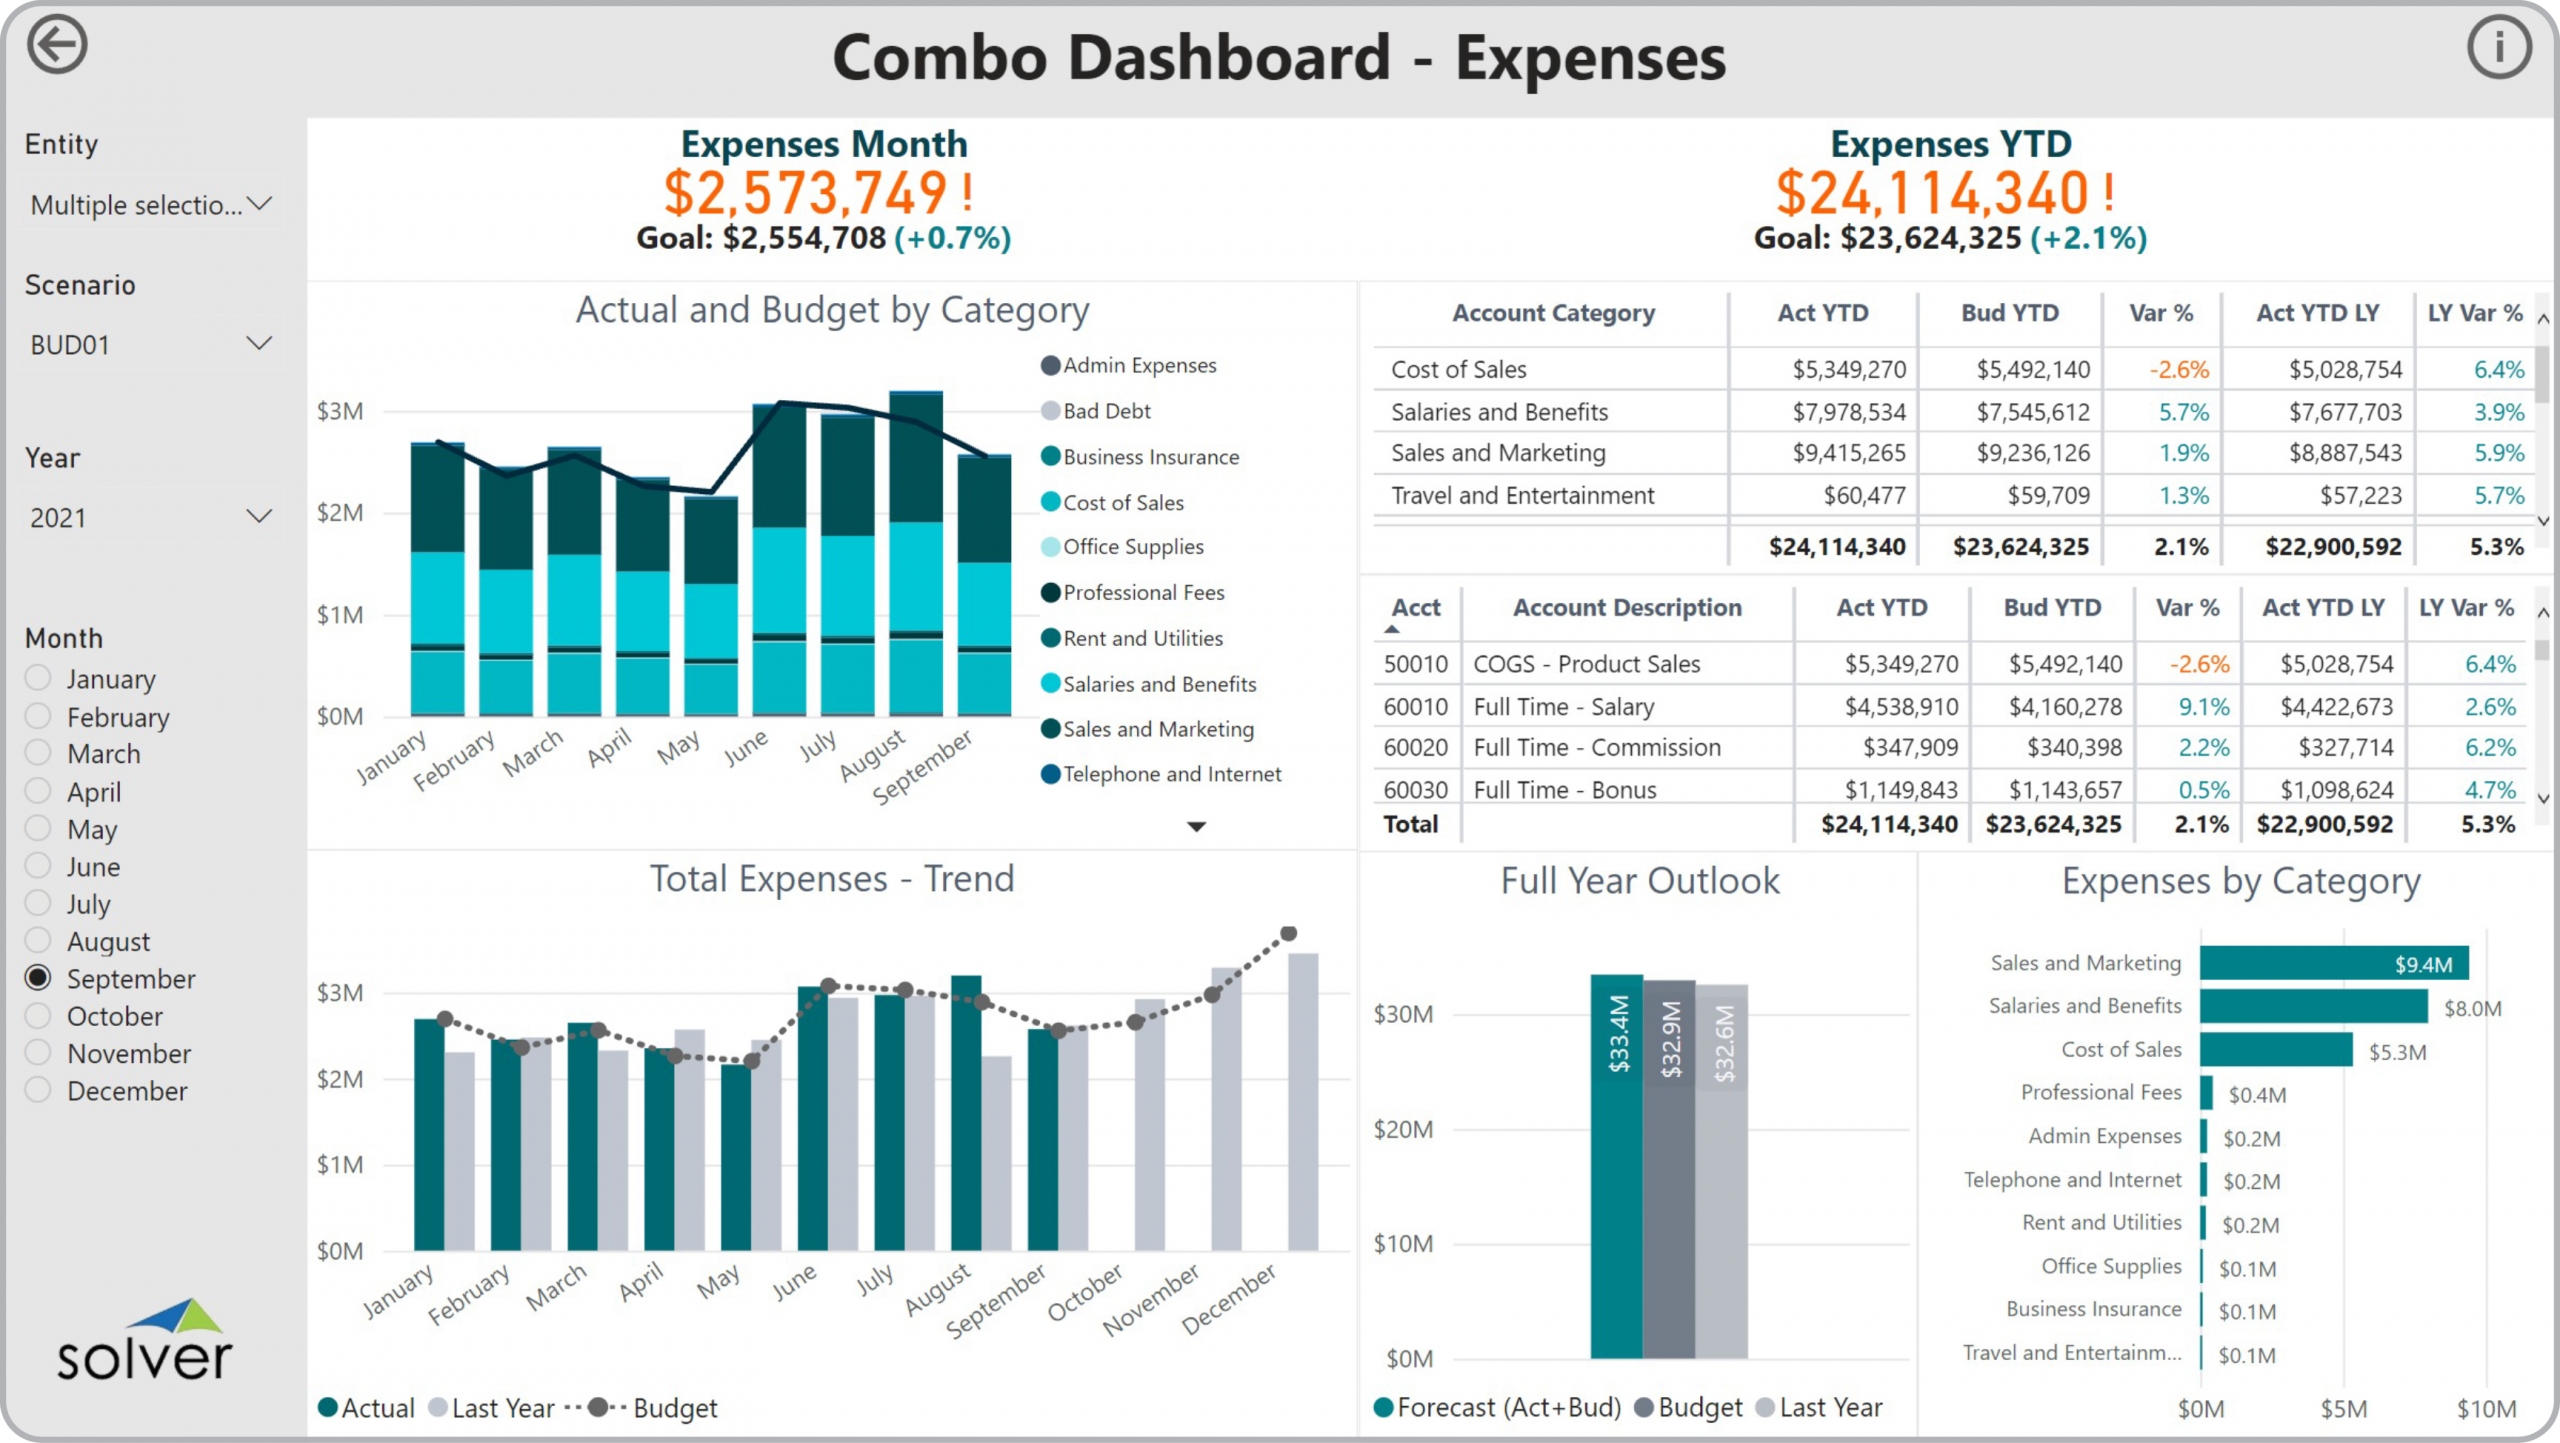 Example of an Expense Dashboard with Trends and Variances to Streamline the Monthly Reporting Process